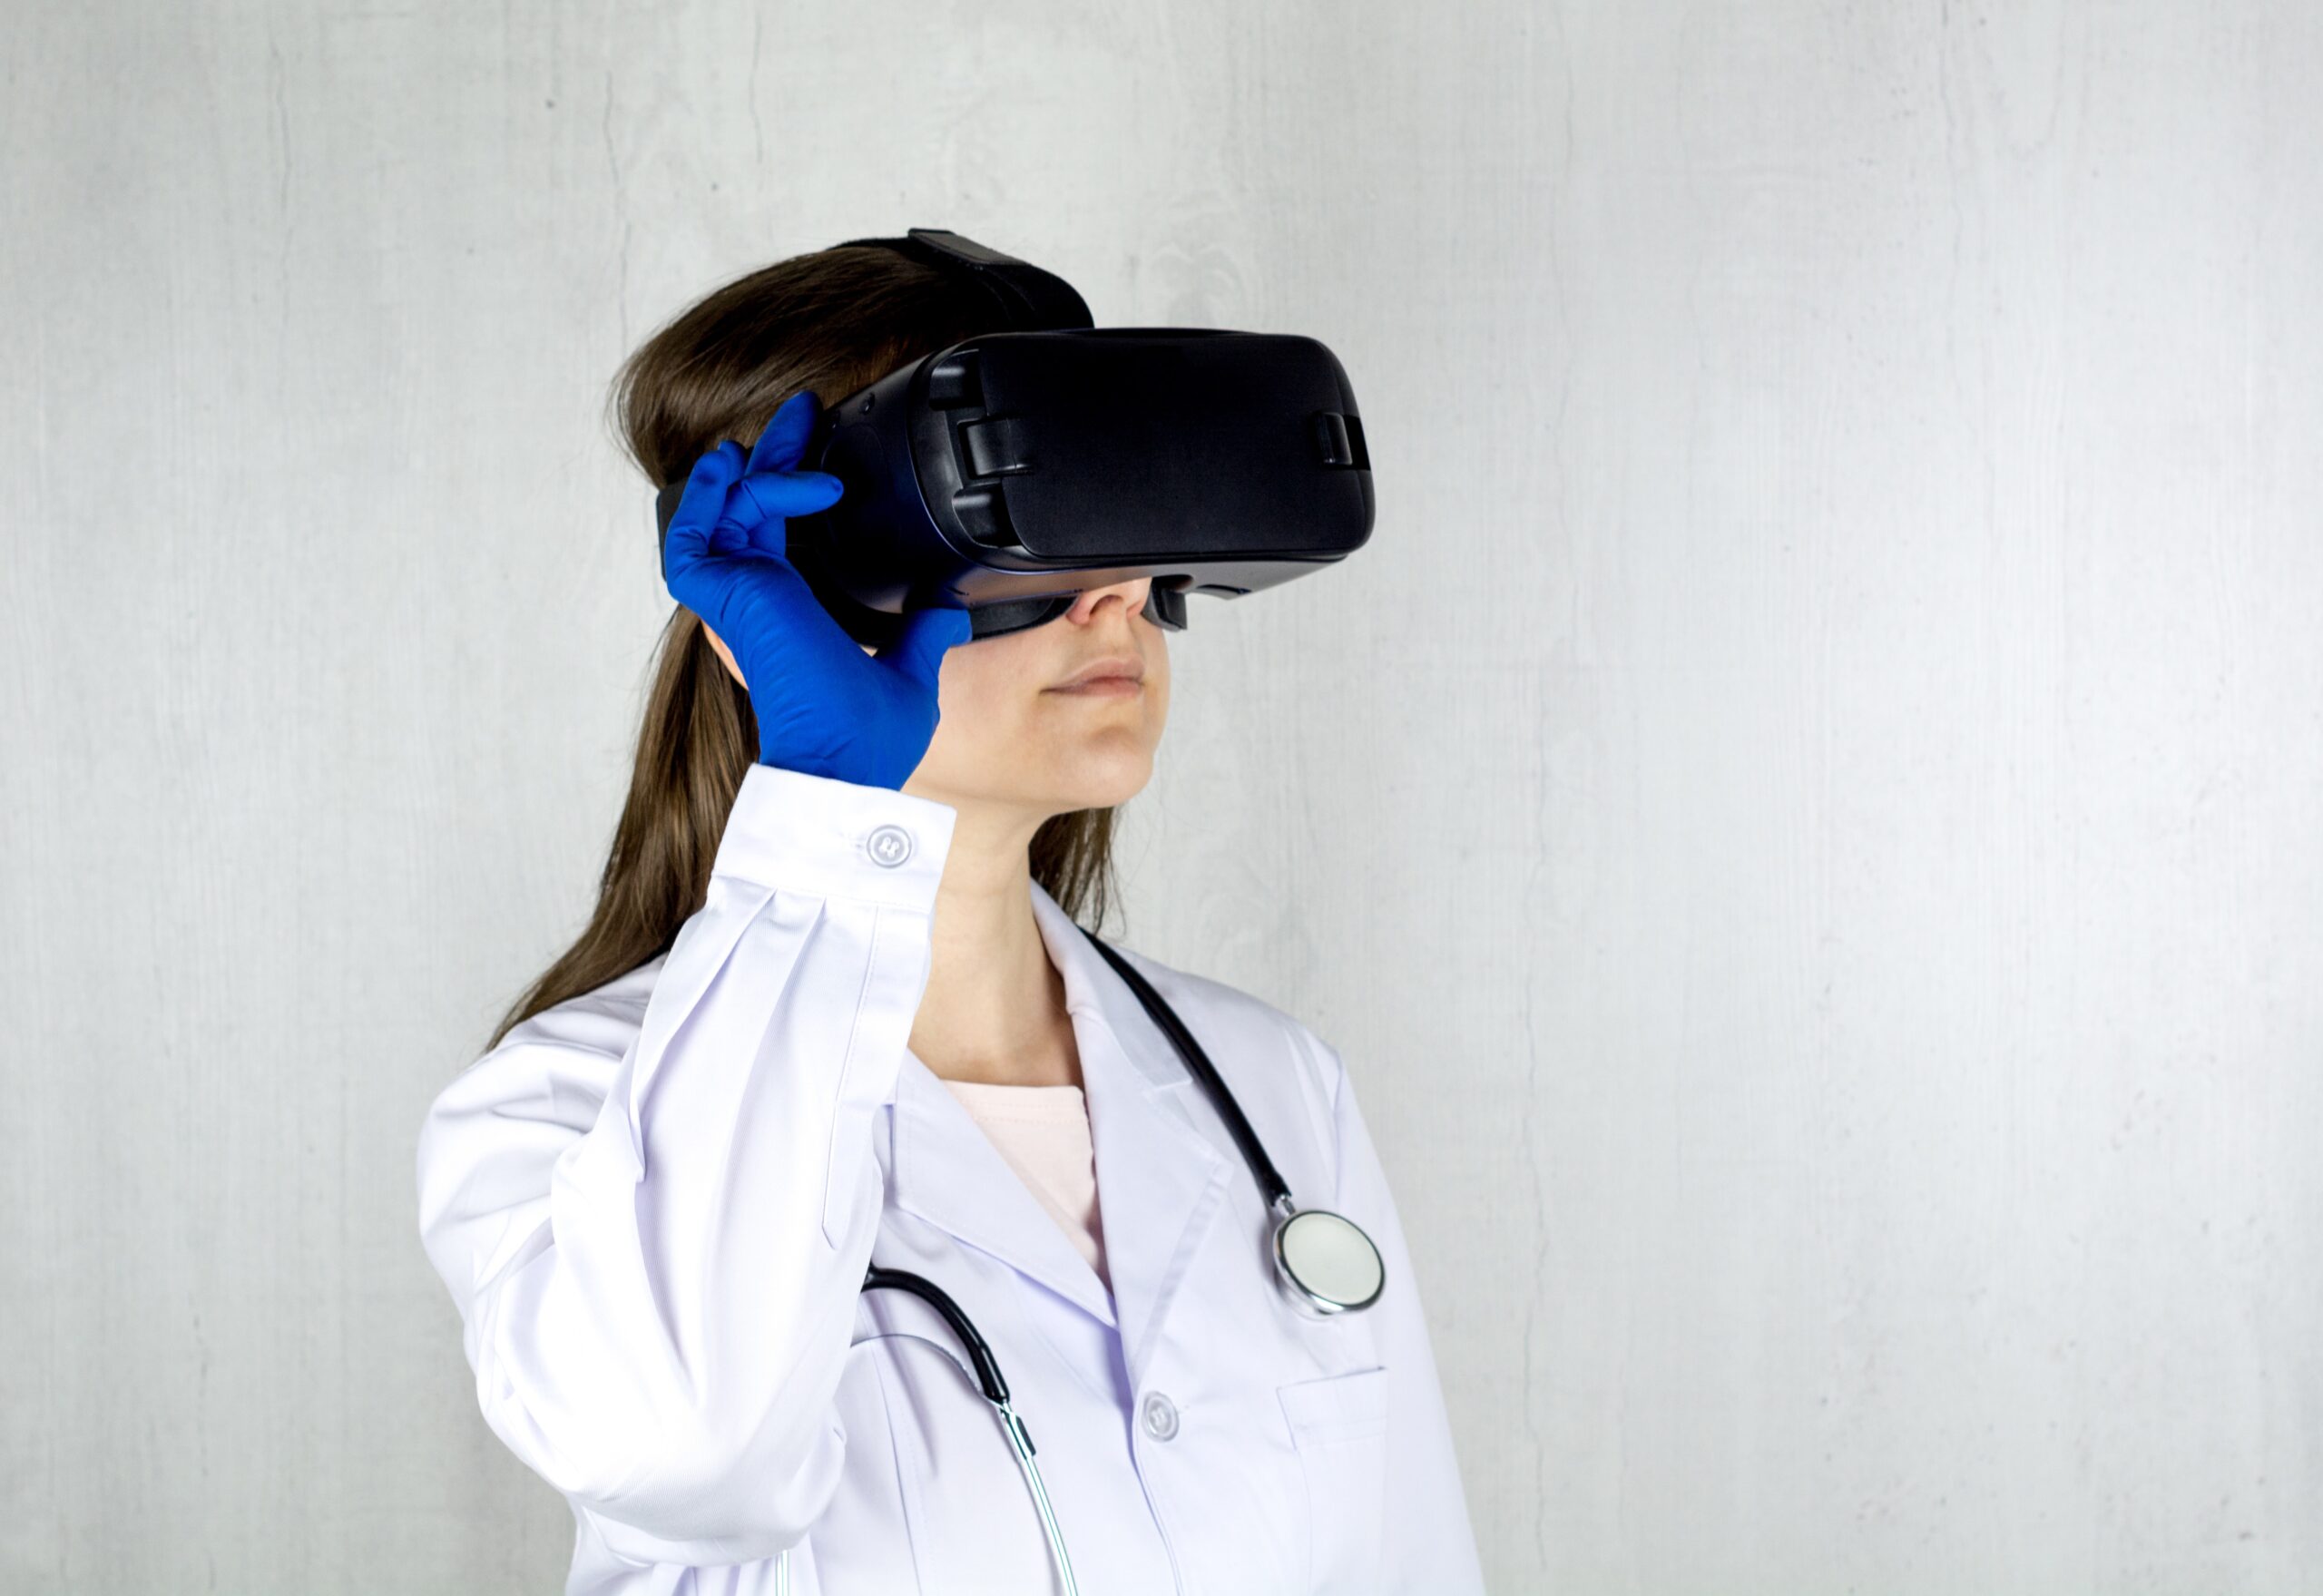 Indoors shot of doctor using virtual reality glasses.